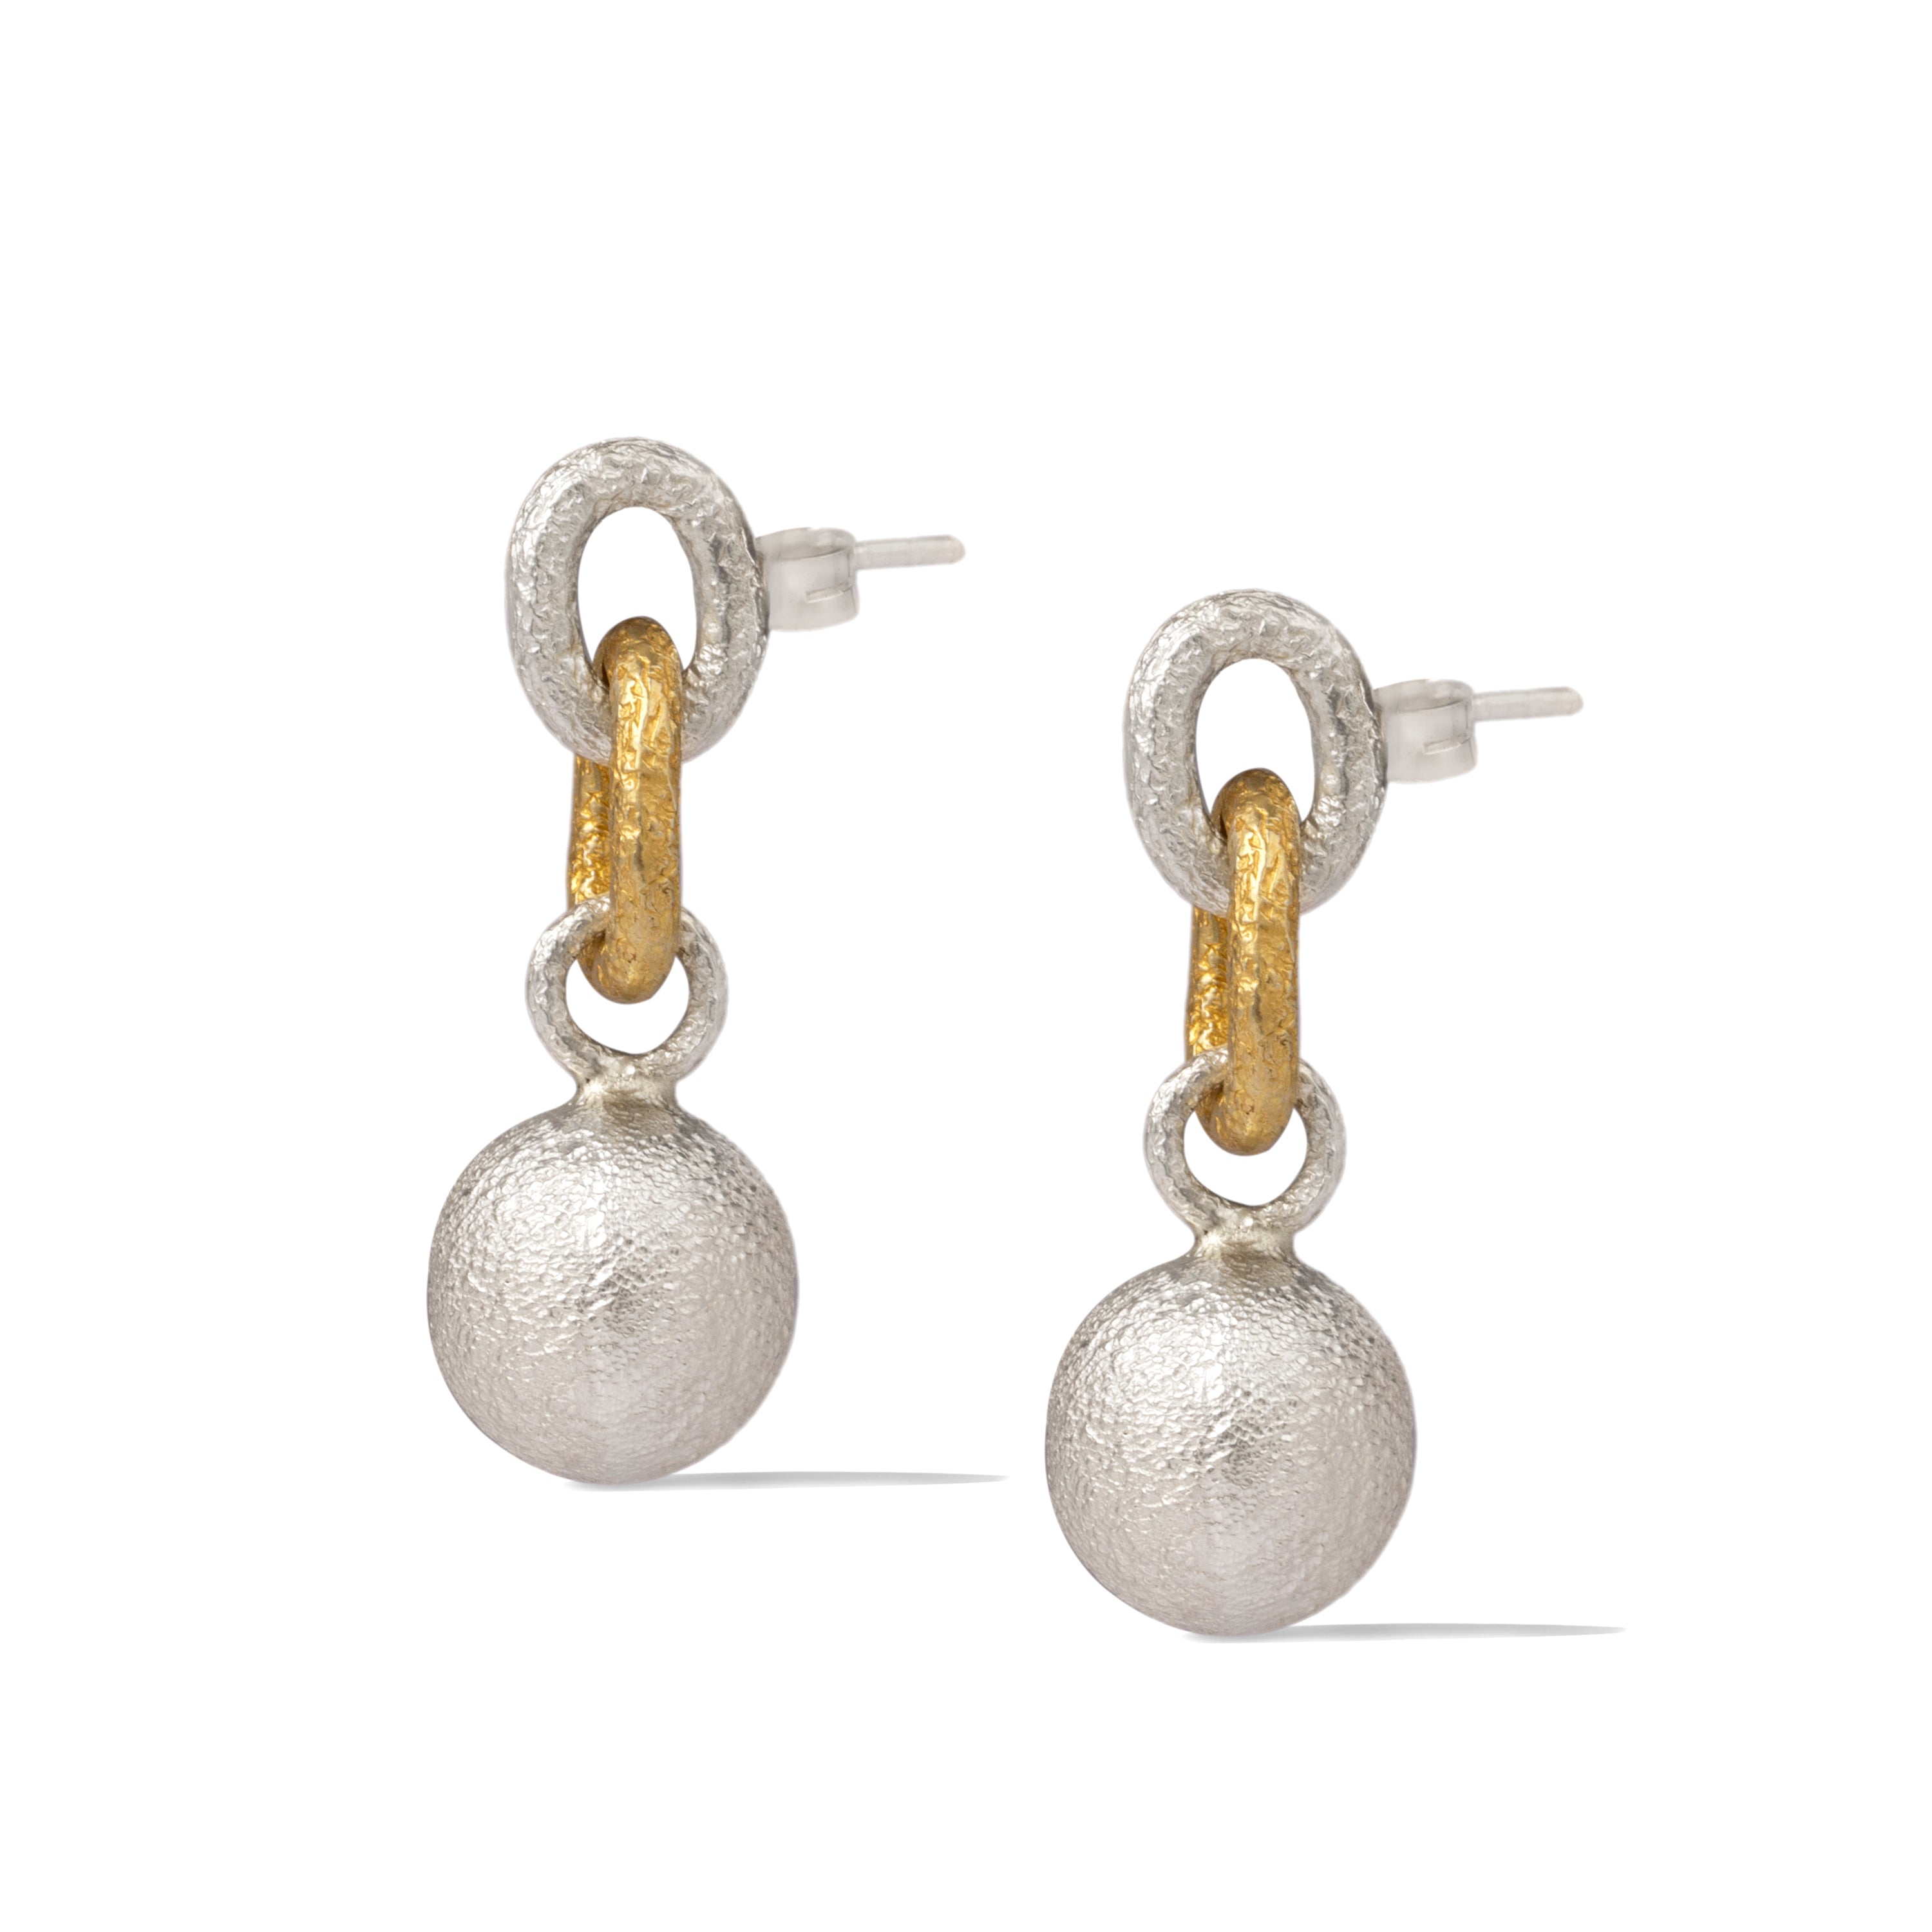 Hanging silver Ball Earring.